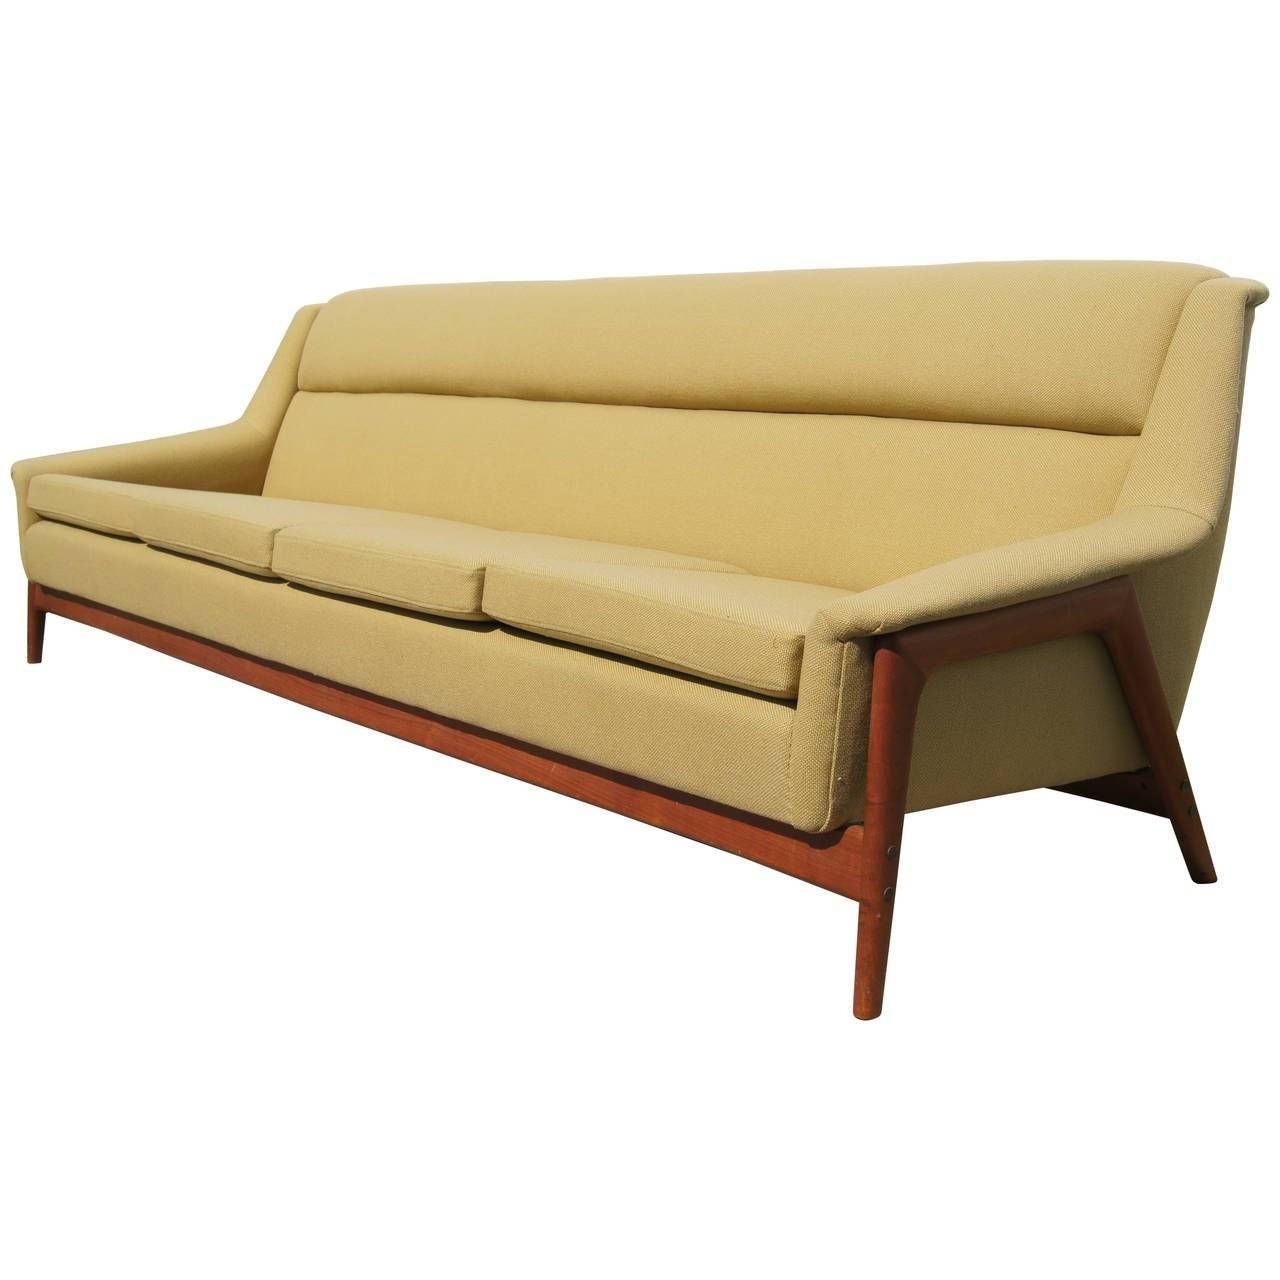 Four Seater Sofafolke Ohlsson For Dux At 1stdibs Within Four Seater Sofas (View 22 of 30)